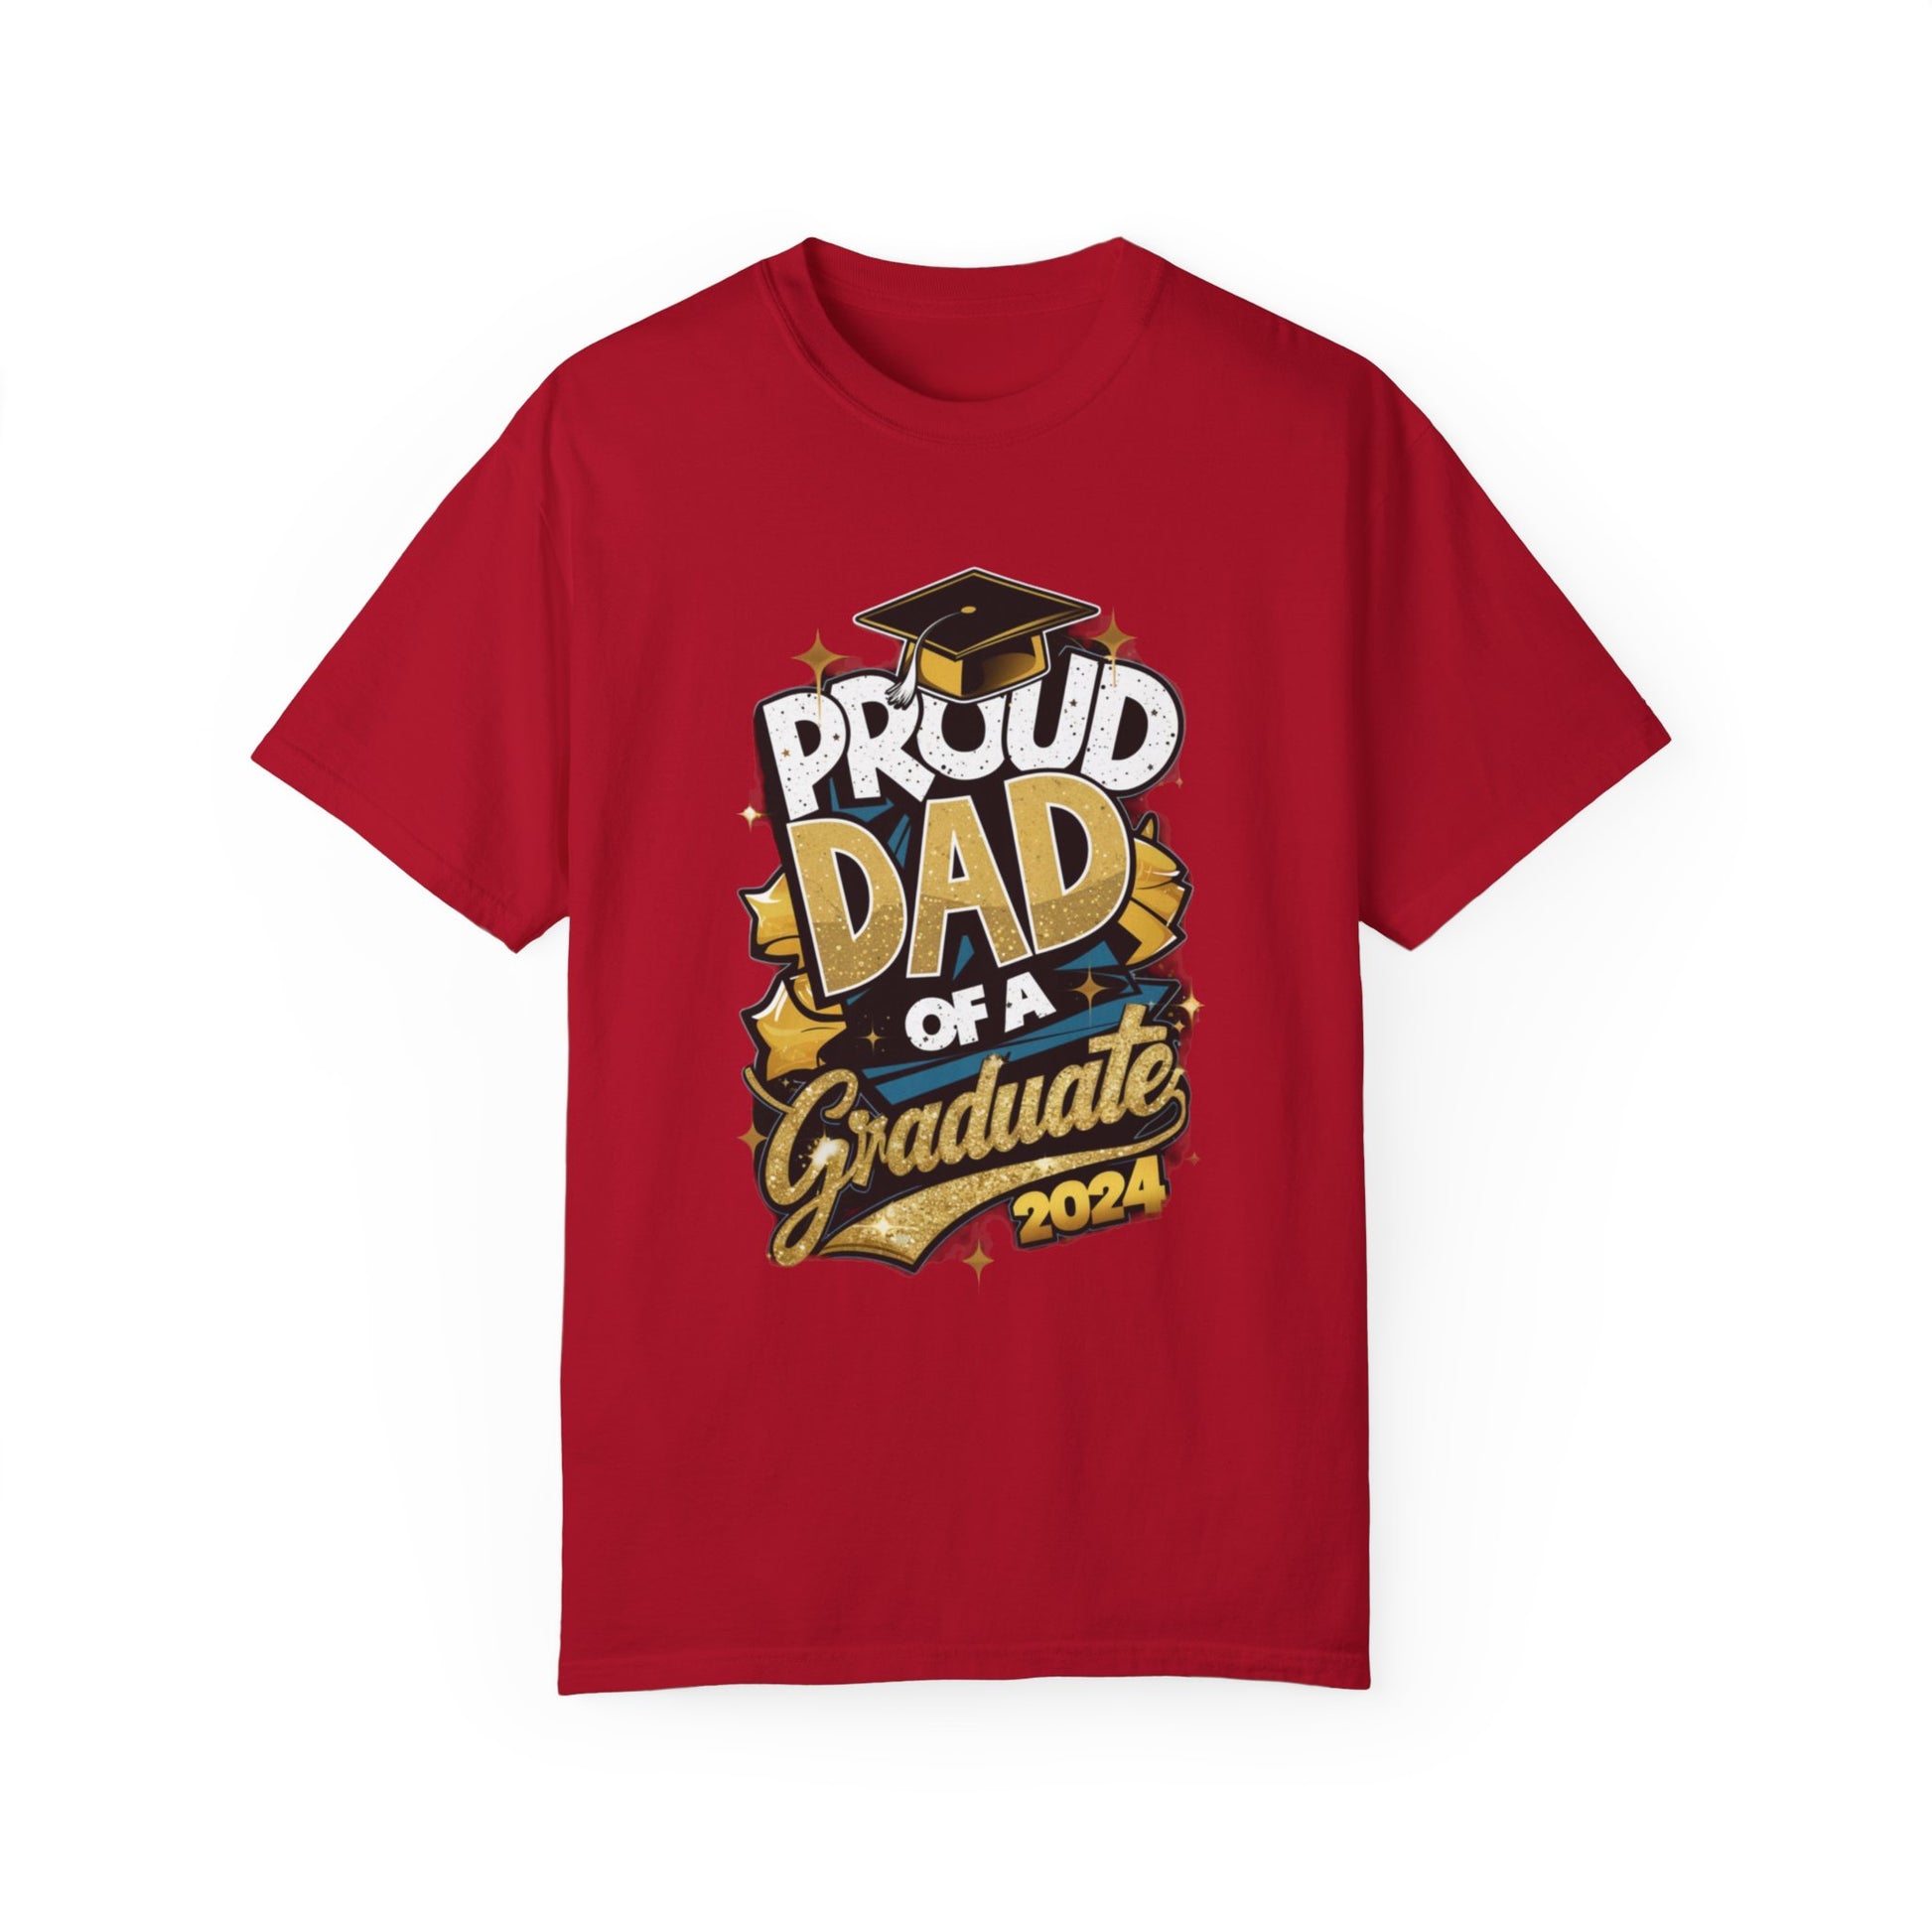 Proud Dad of a 2024 Graduate Unisex Garment-dyed T-shirt Cotton Funny Humorous Graphic Soft Premium Unisex Men Women Red T-shirt Birthday Gift-2